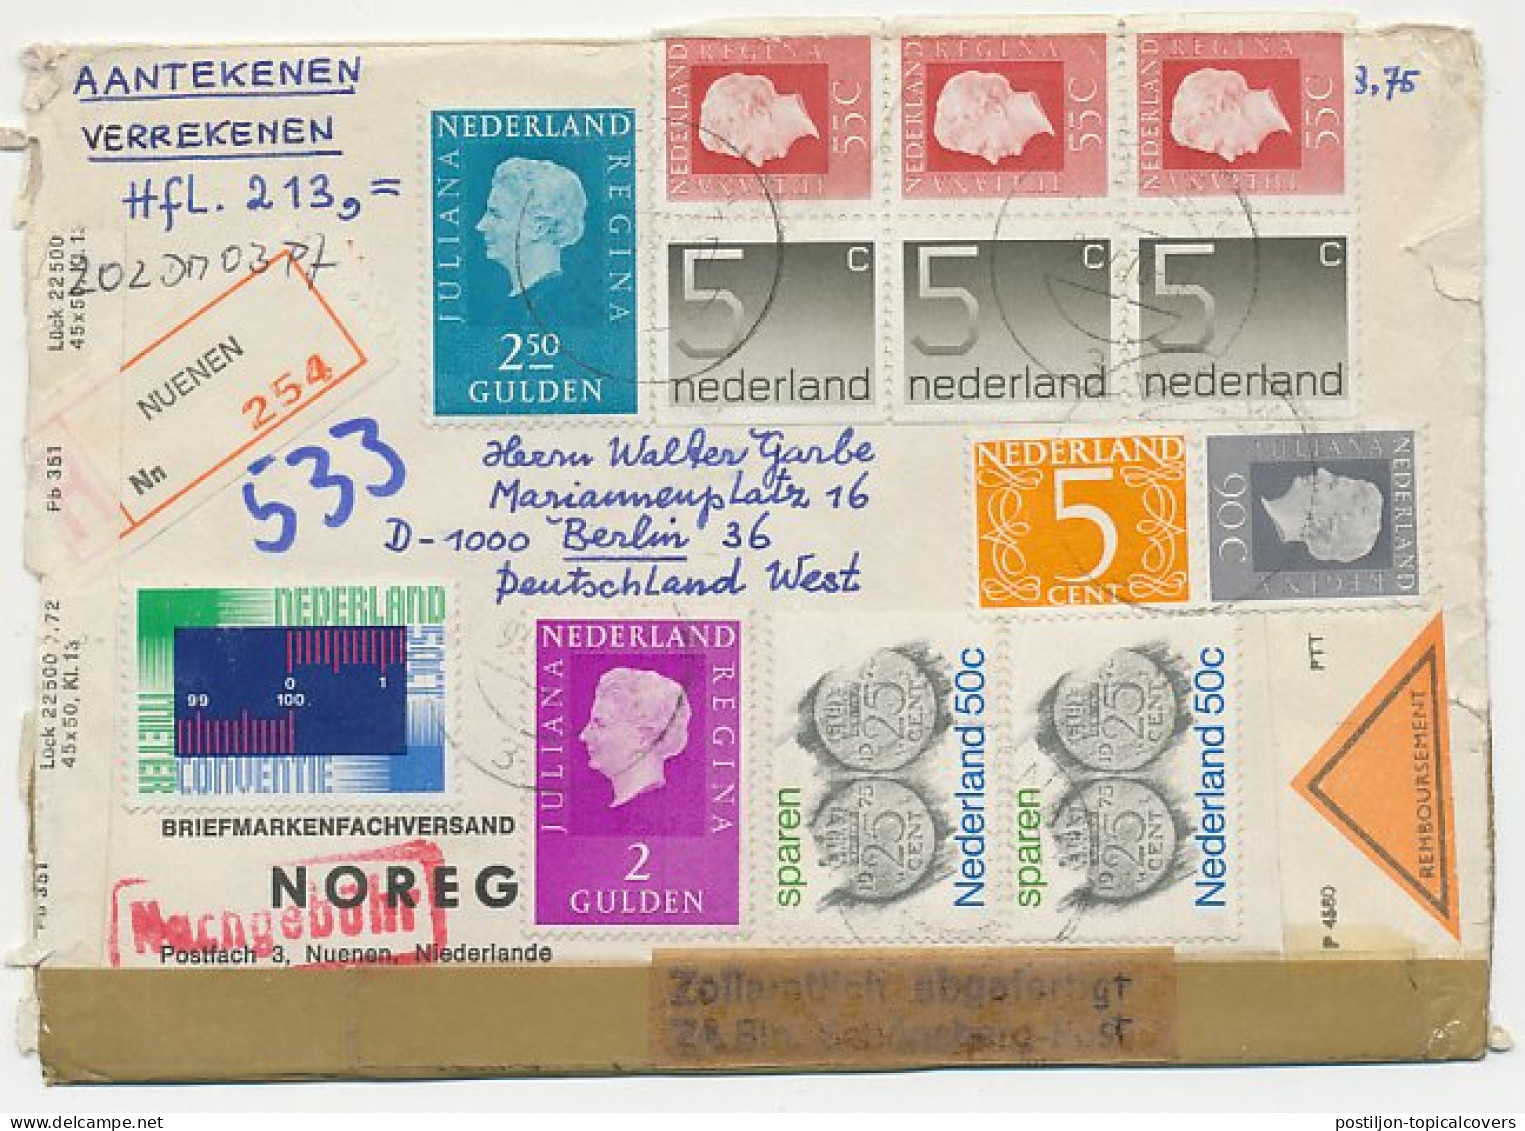 Damaged Mail Cover Netherlands - Germany 1976 Received Damaged - Officially Sealed - Label / Seal - Zonder Classificatie